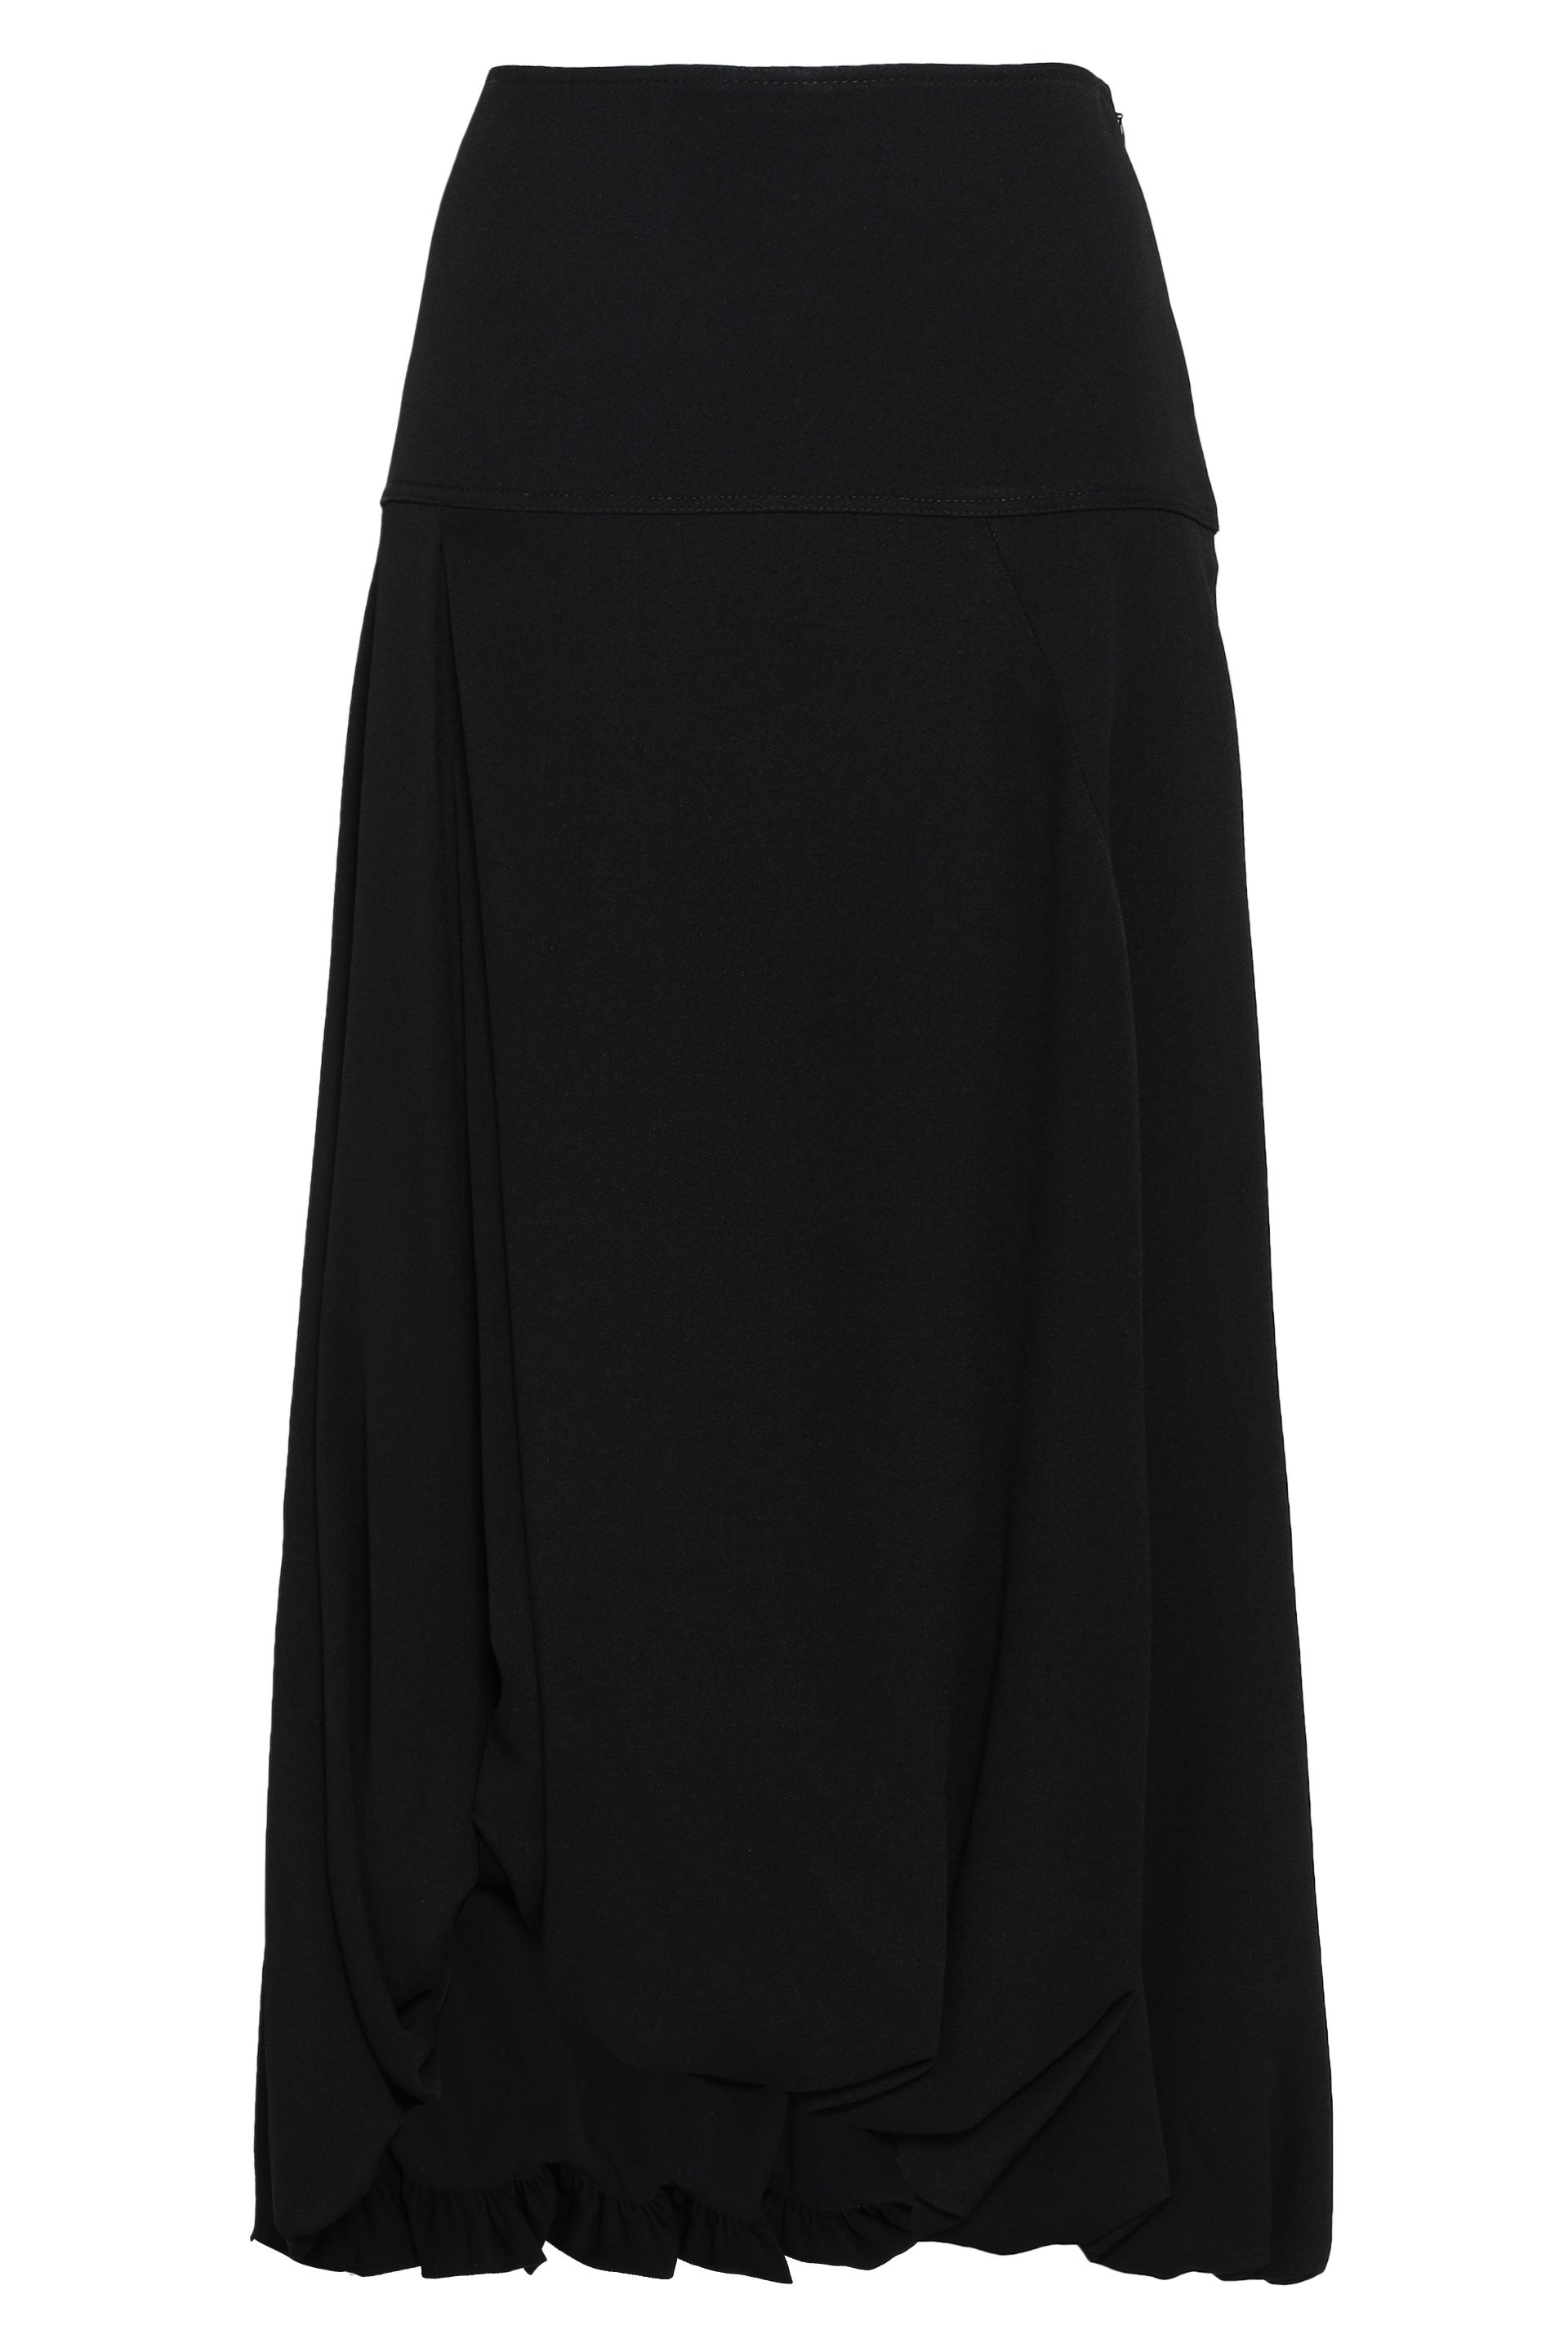 Designer Asymmetric Skirts | Sale Up To 70% Off At THE OUTNET